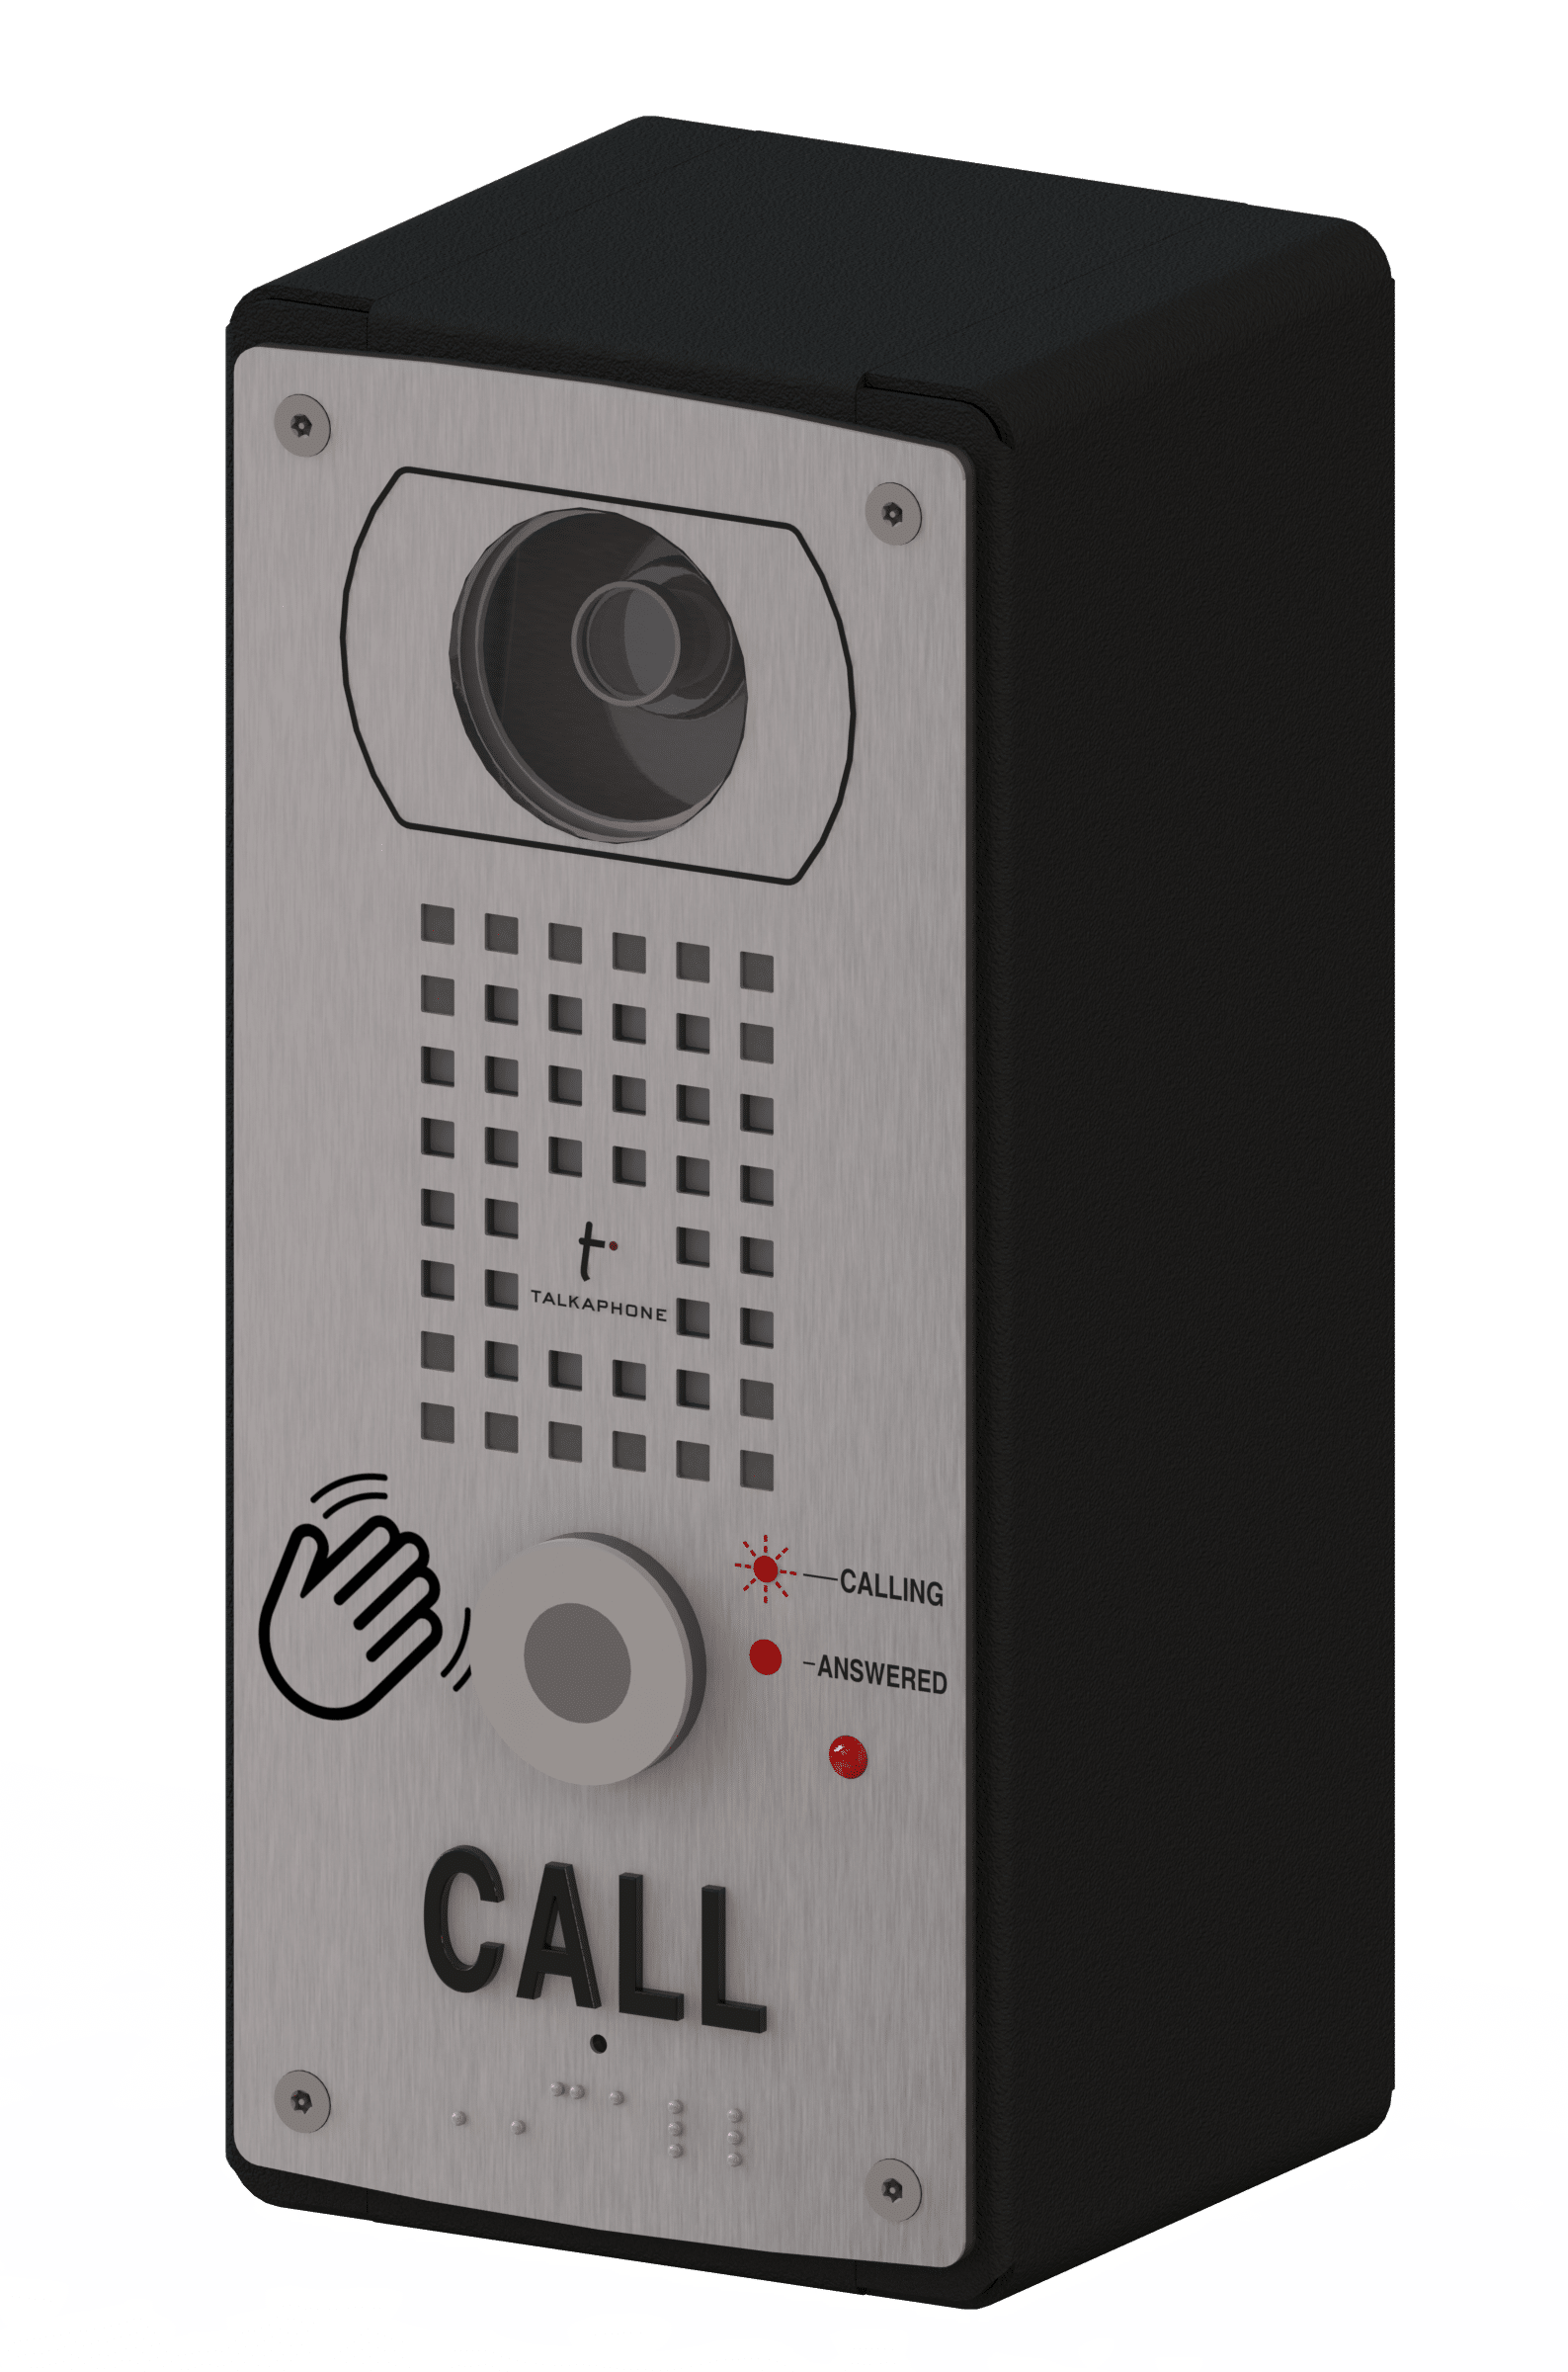 VOIP-201C3 with WaveSense Technology